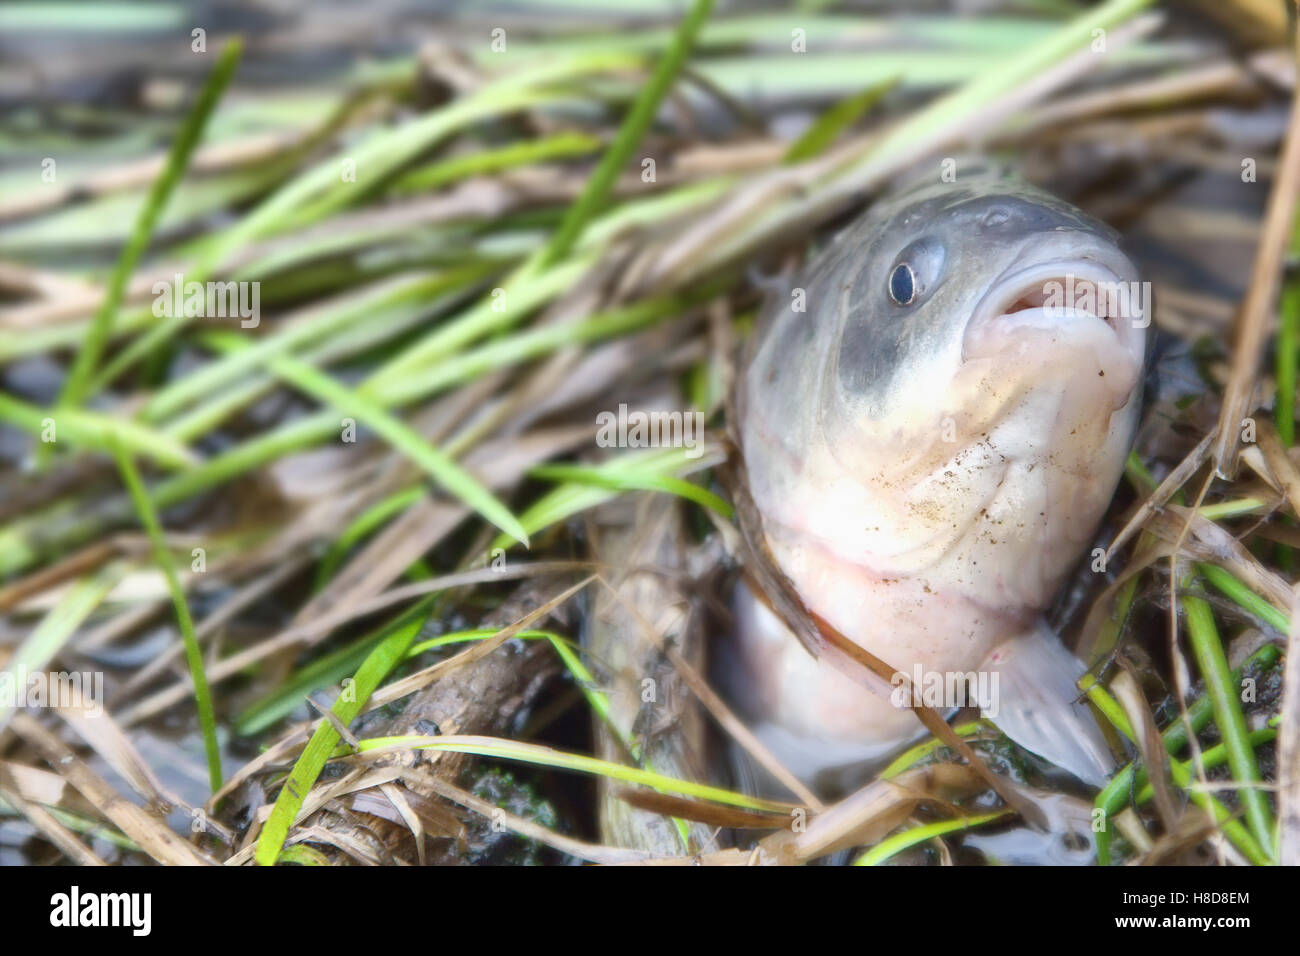 Carp stuck among sedges and breathes wide-open mouth. Stock Photo